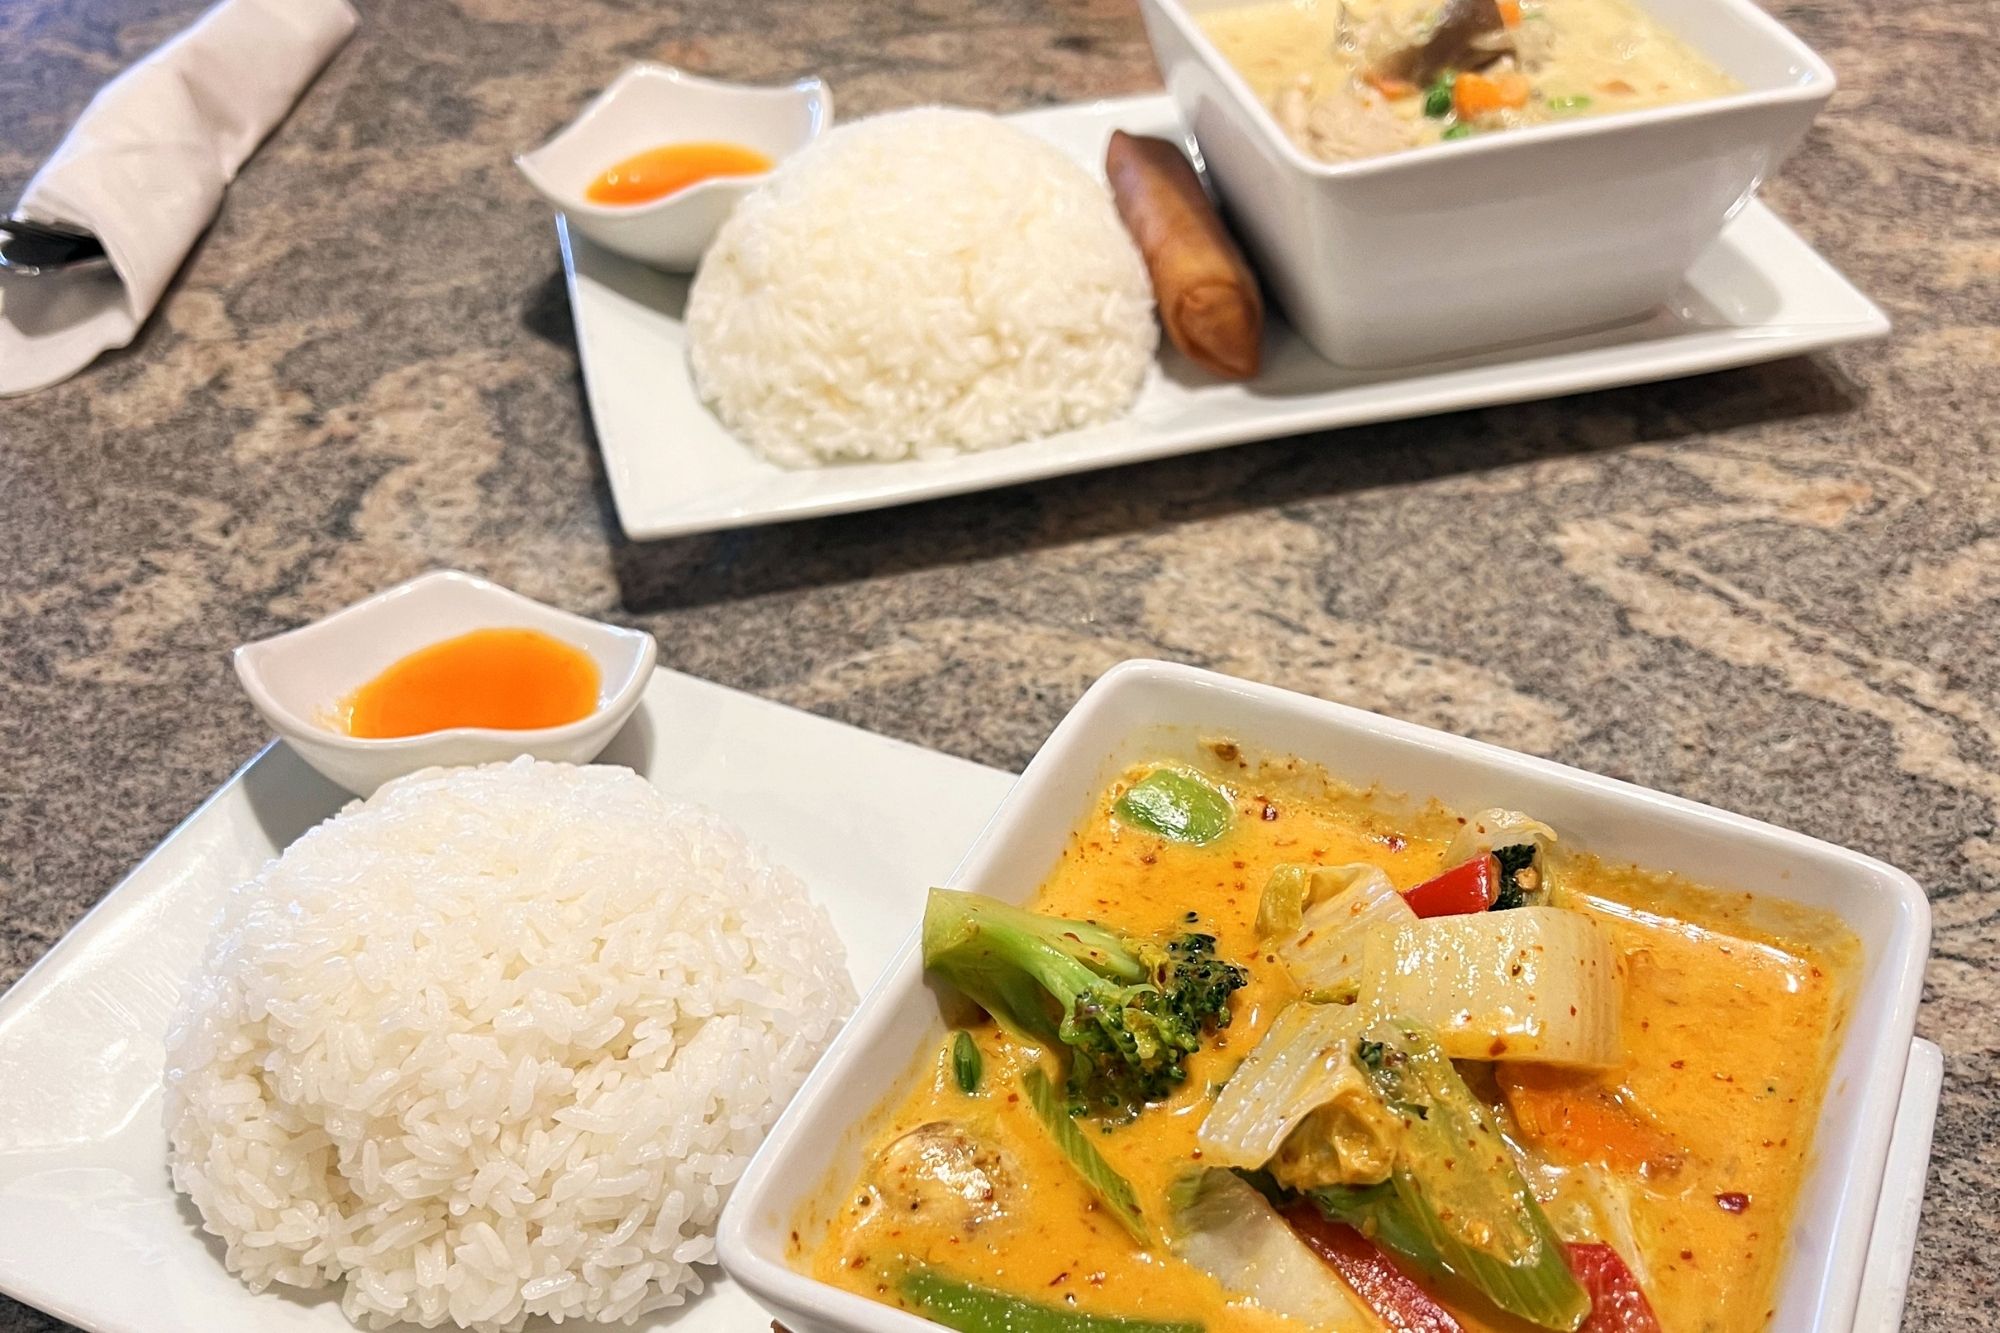 A panang curry with vegetables and a green curry with pork